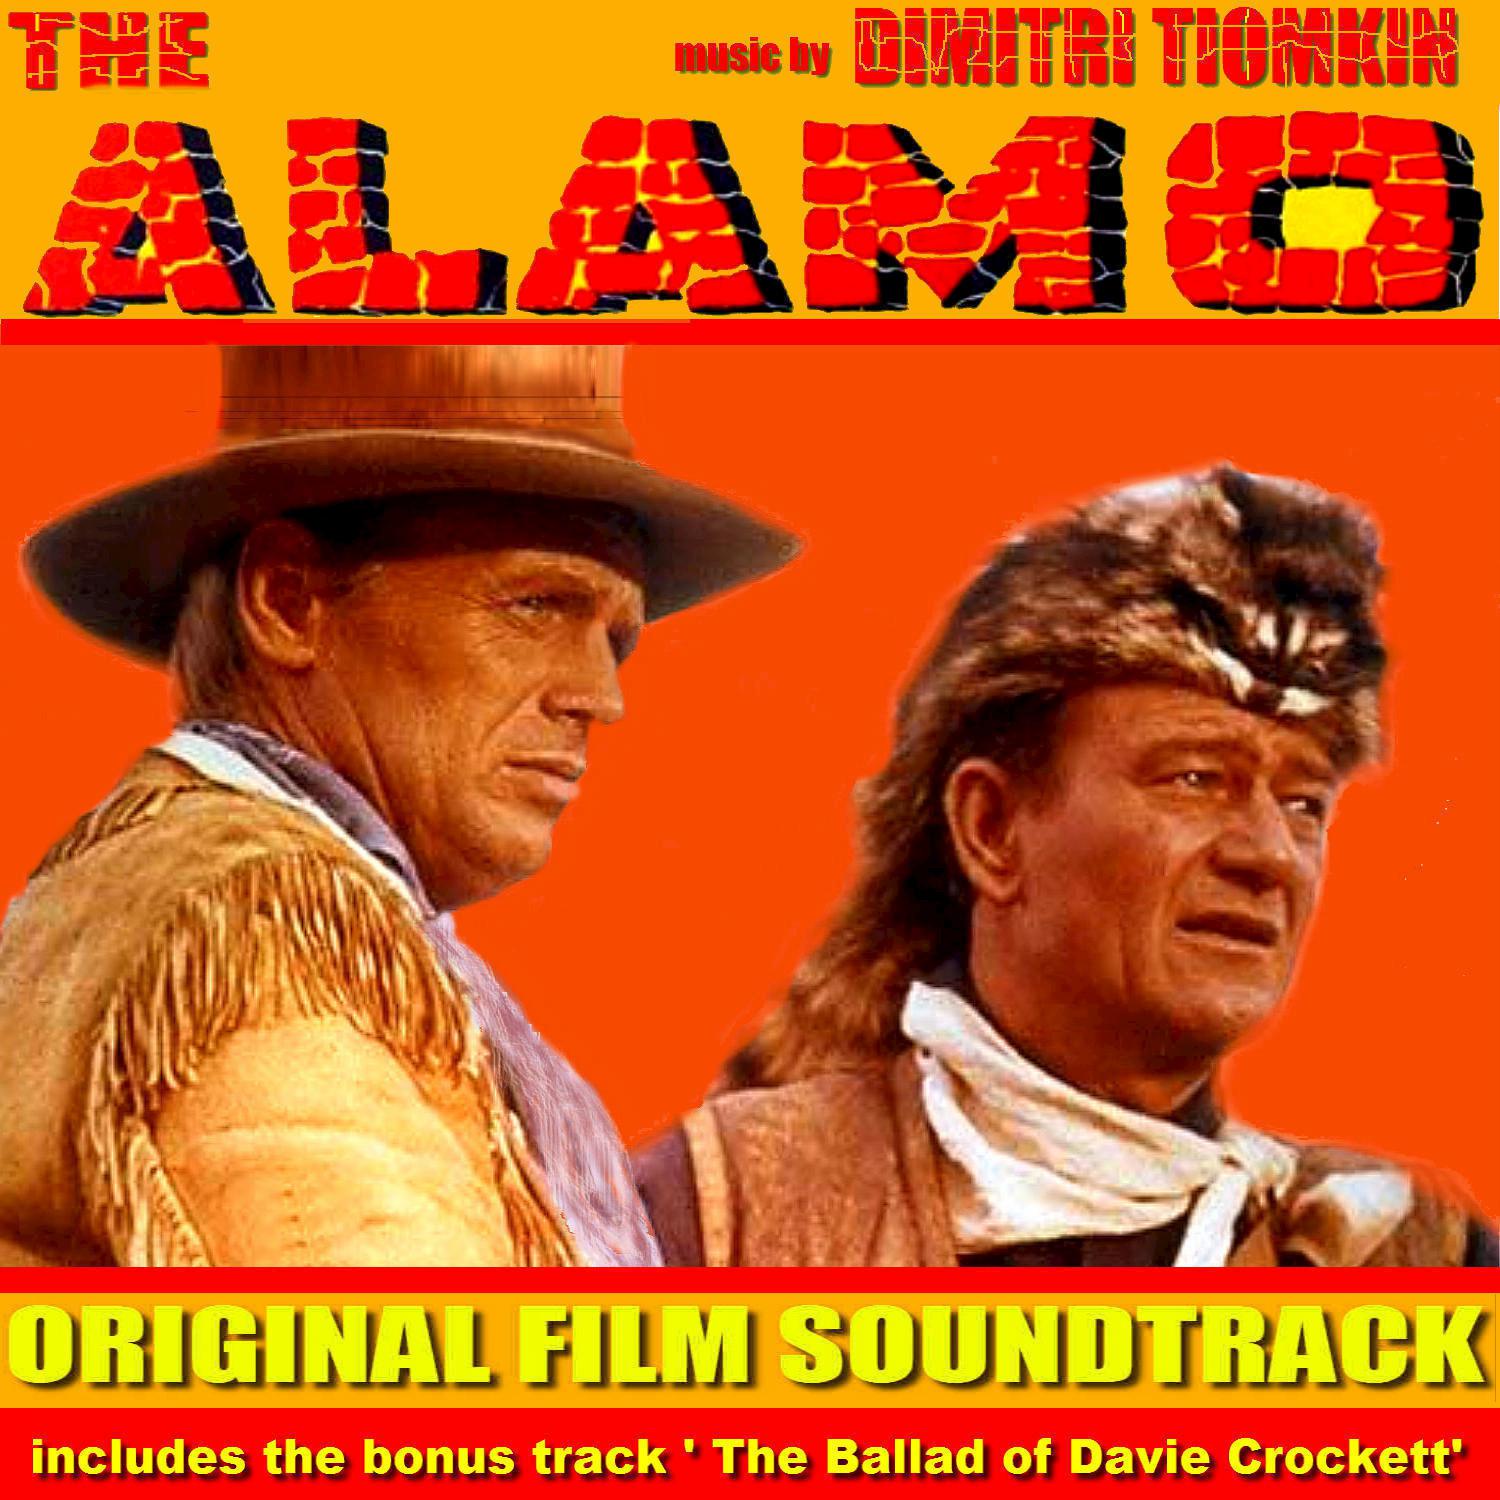 Main Title / Deguello / The Green Leaves of Summer (From "The Alamo")